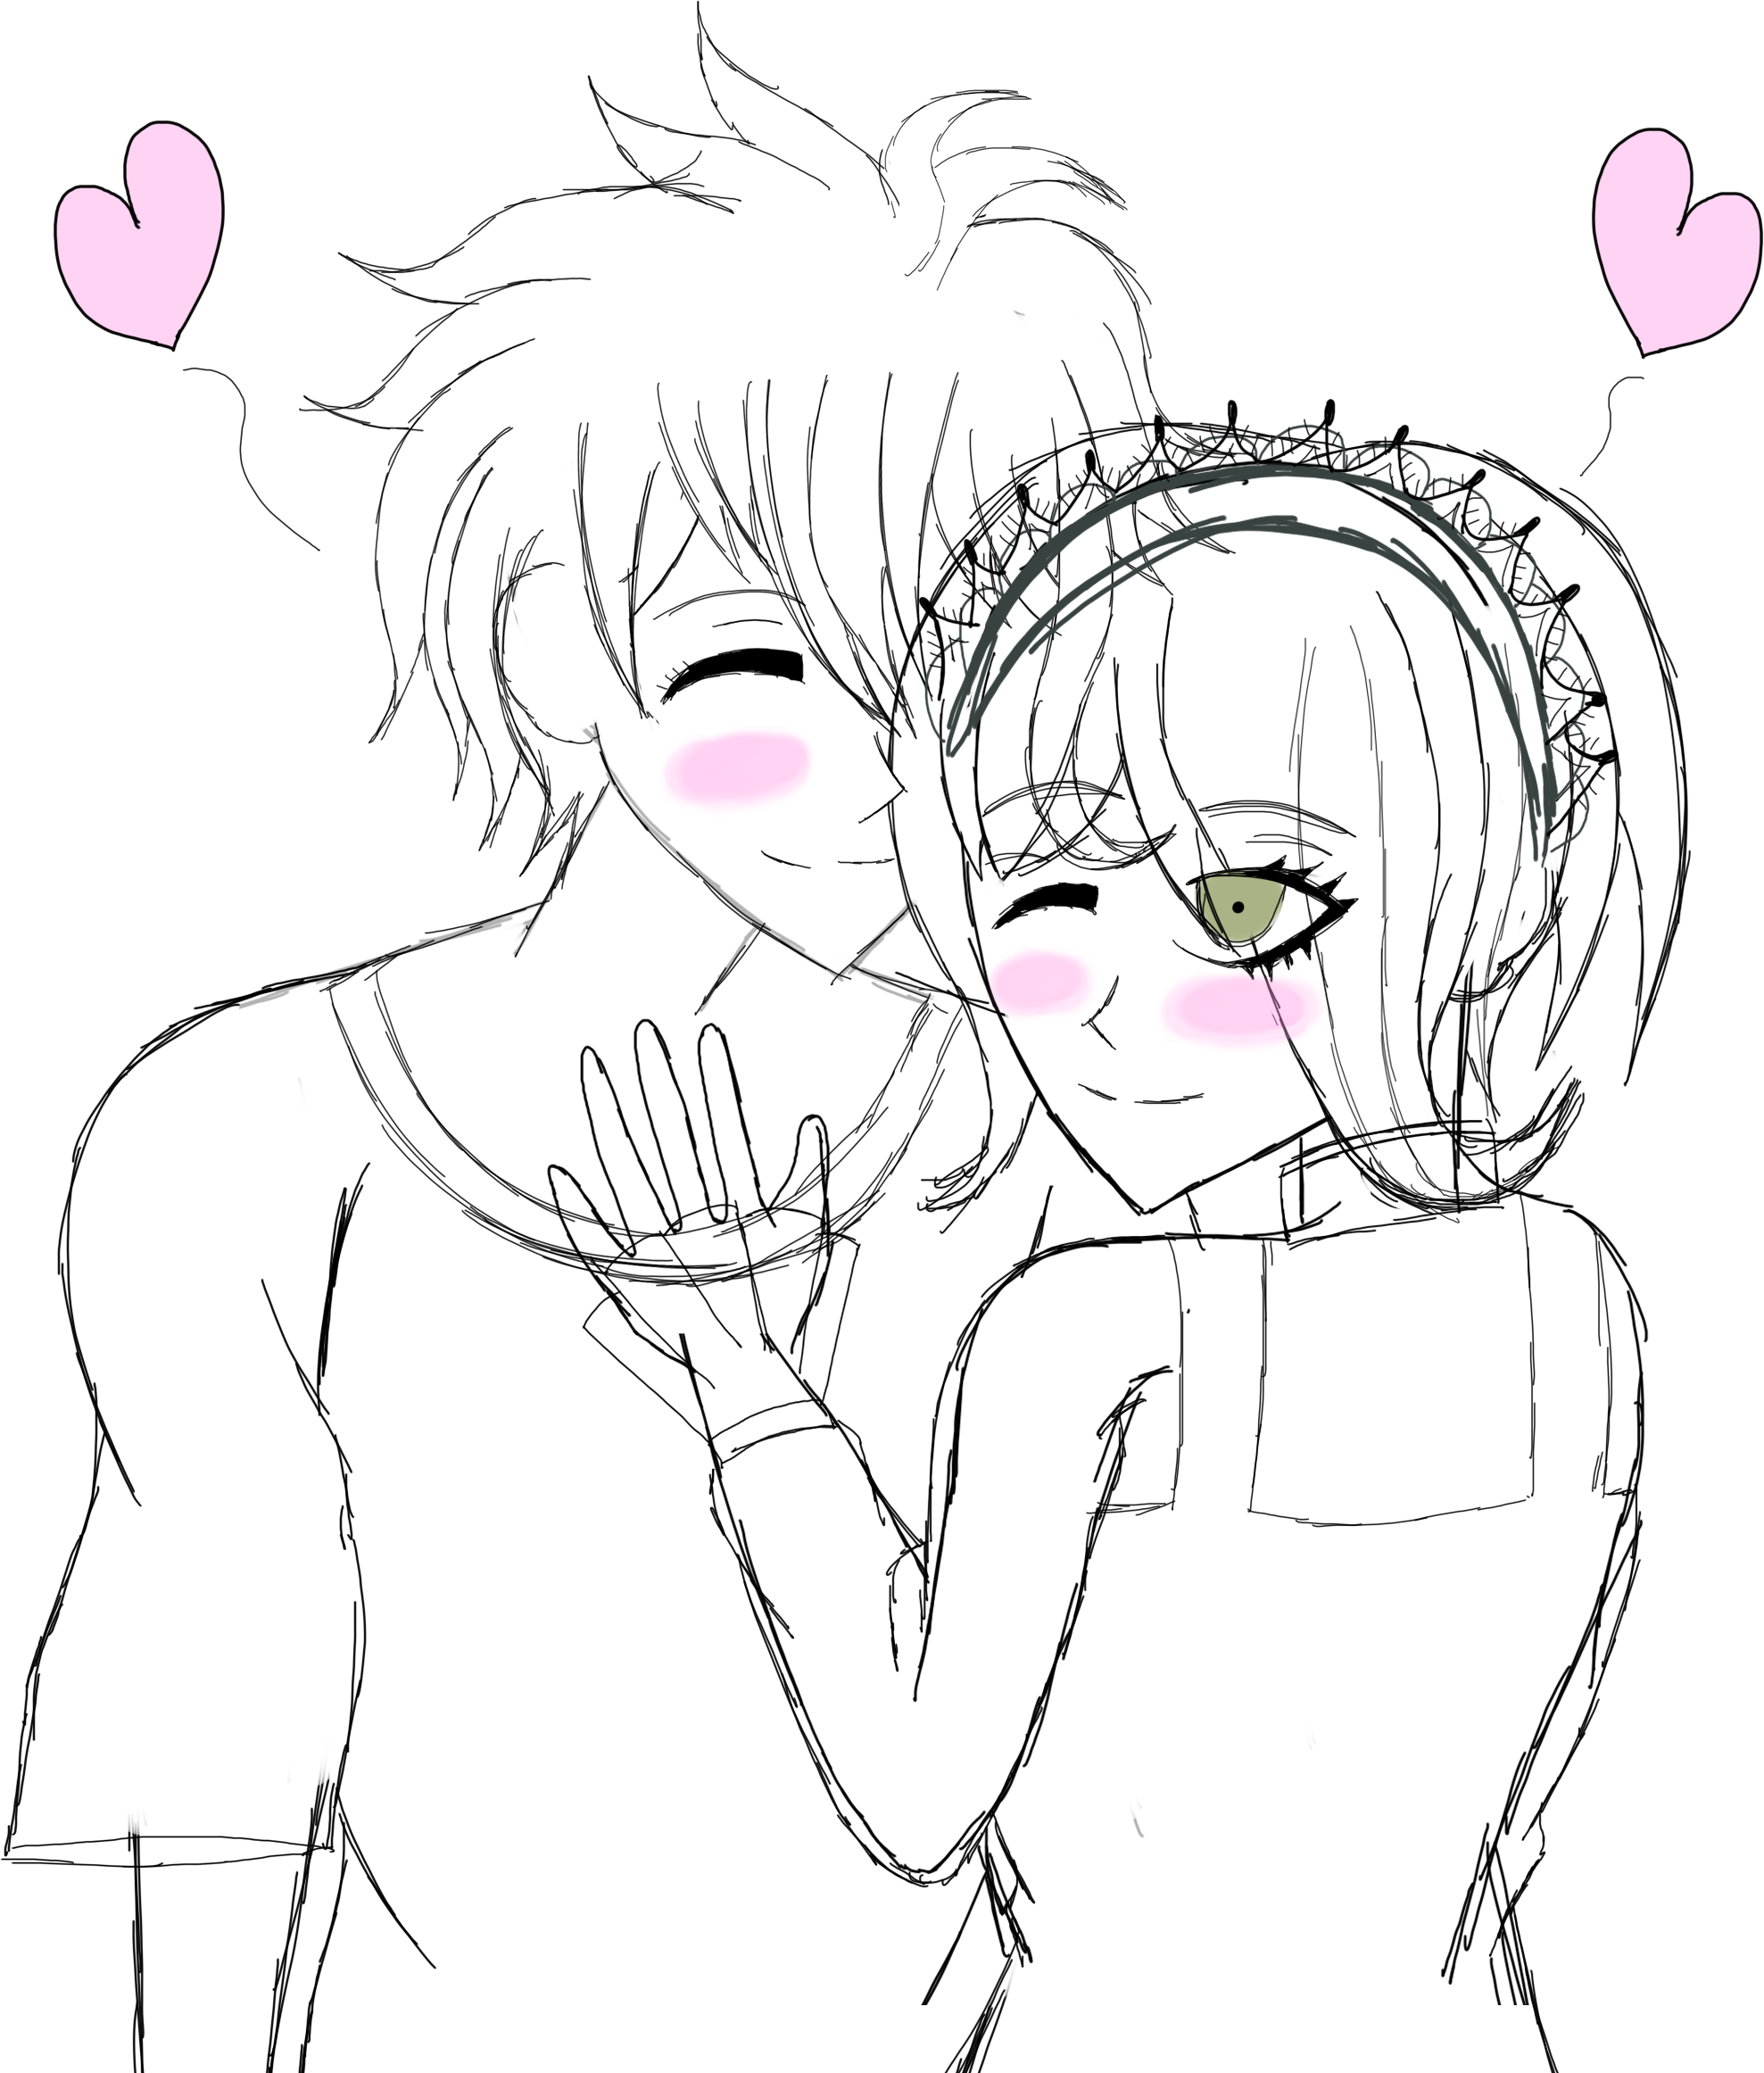 anime couples kissing coloring pages